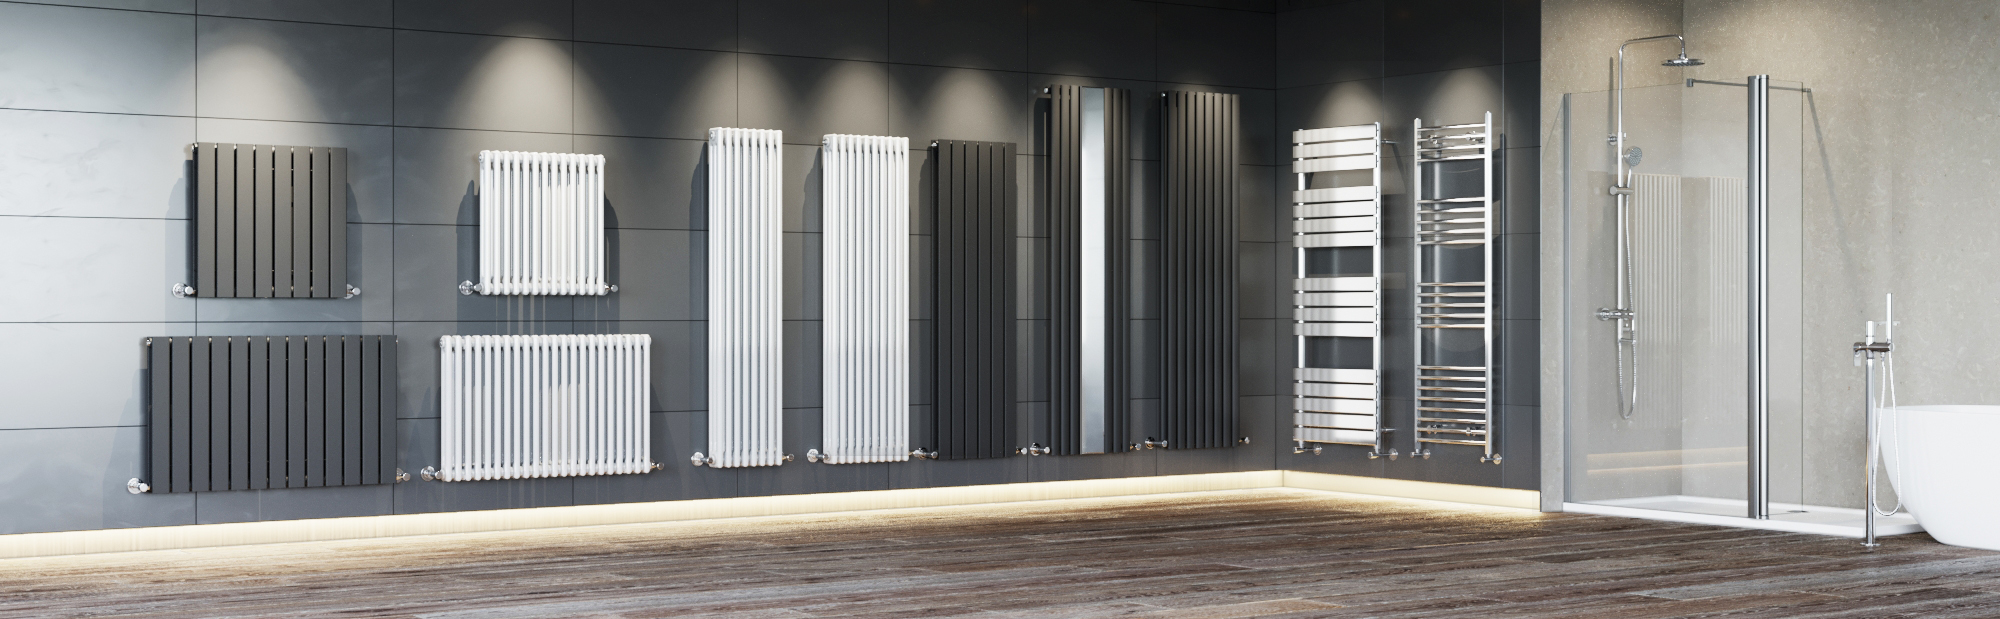 Simple Guidance For You In The Right Elegant Radiators For Your Central Heating At Home - Elegant Showers